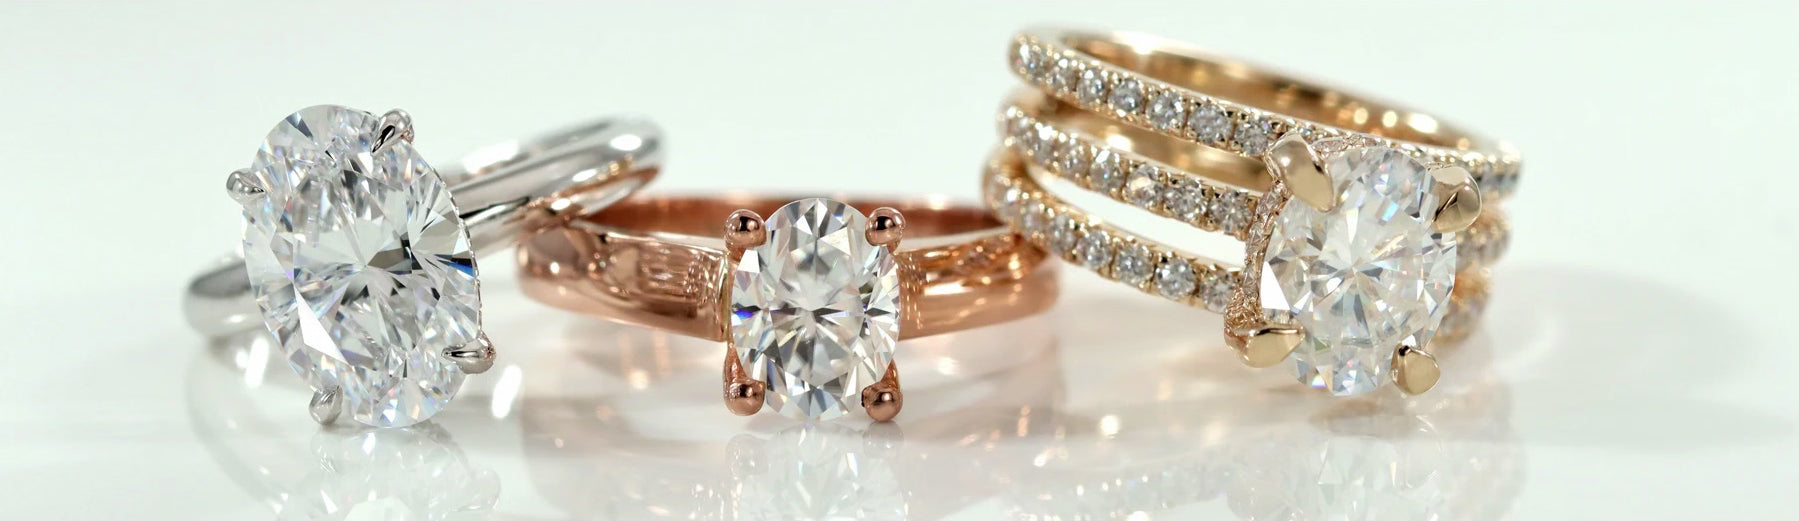 handcrafted solid white yellow rose gold and platinum metals used in Quorri engagement rings